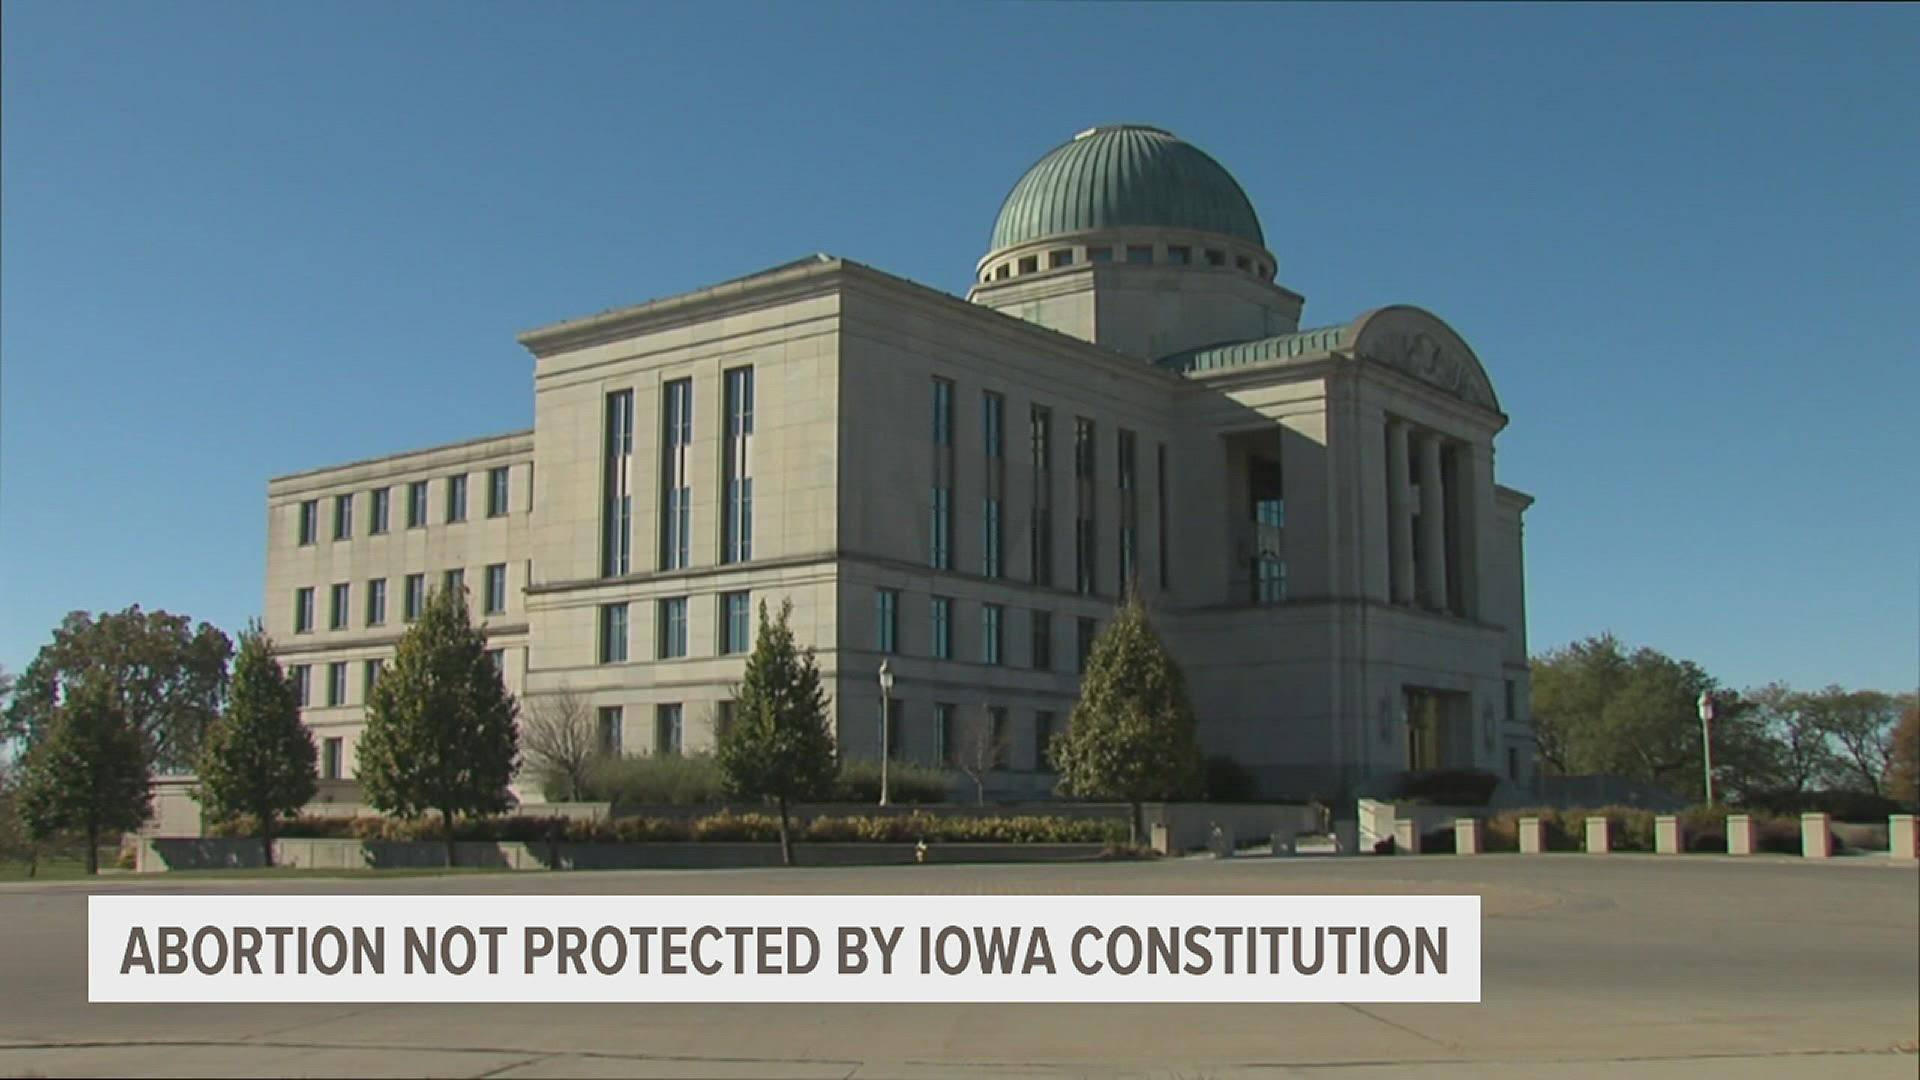 The state Supreme Court's reversal of a 2018 decision guaranteeing the right to abortion will lead to uncertainty for women's reproductive rights in Iowa.